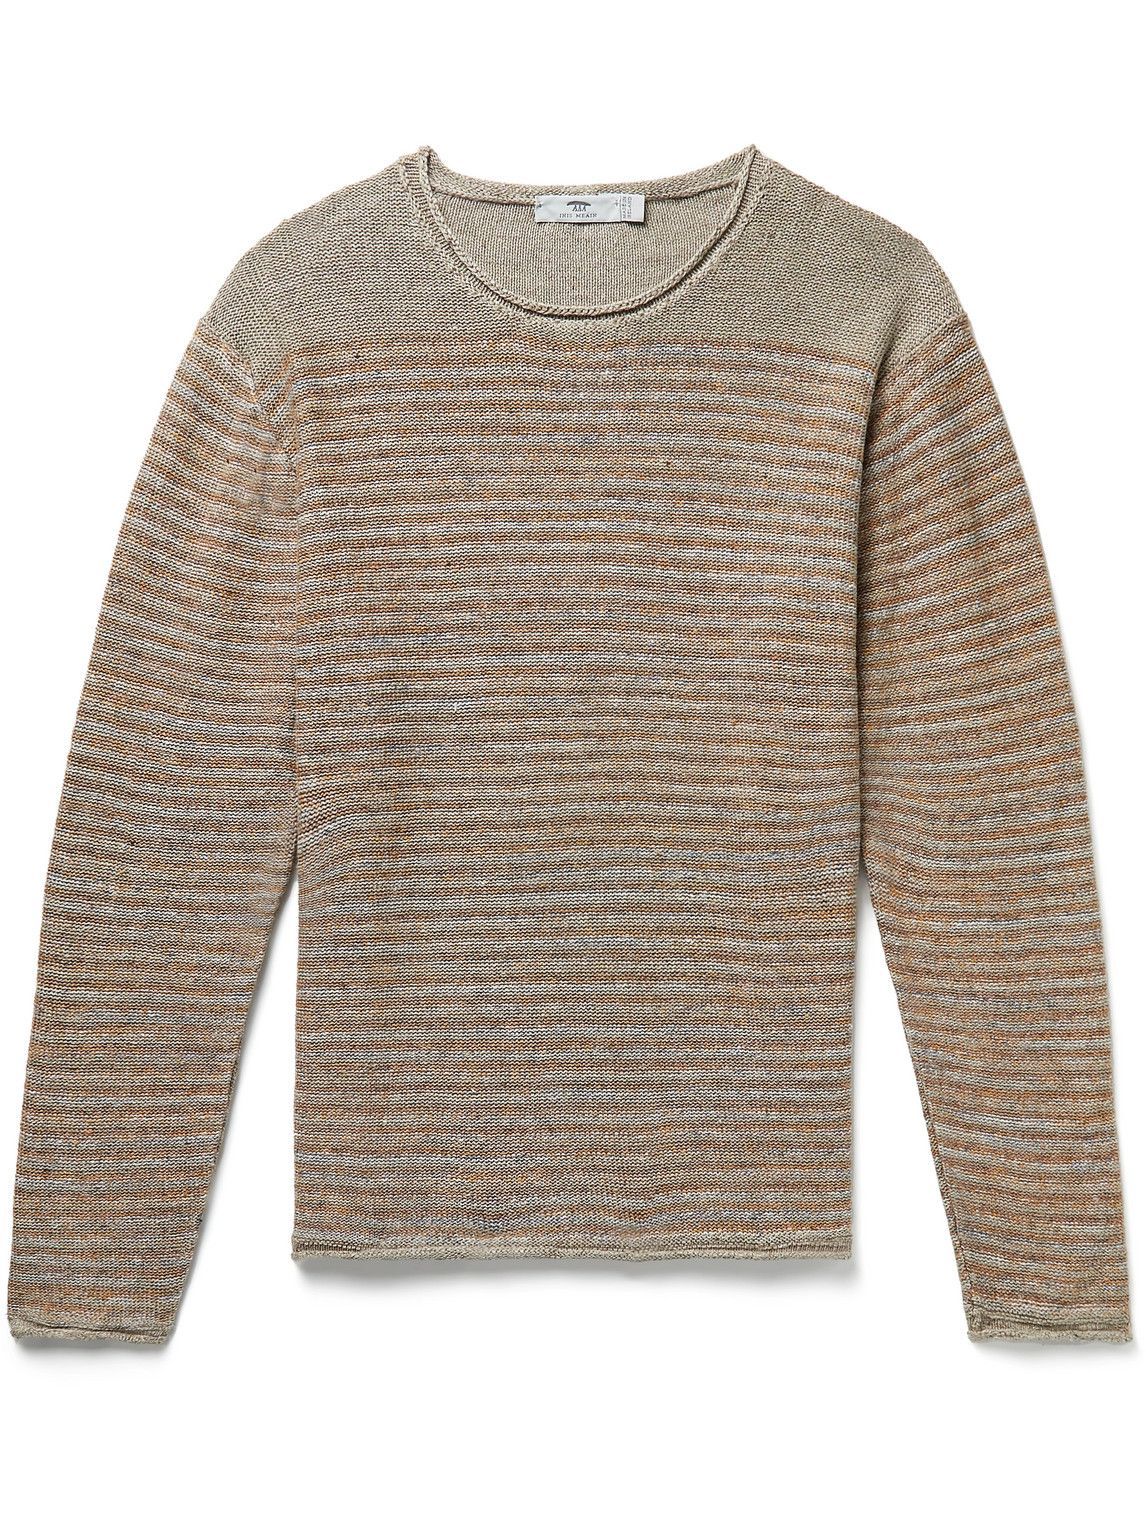 Photo: Inis Meáin - Striped Linen Sweater - Brown